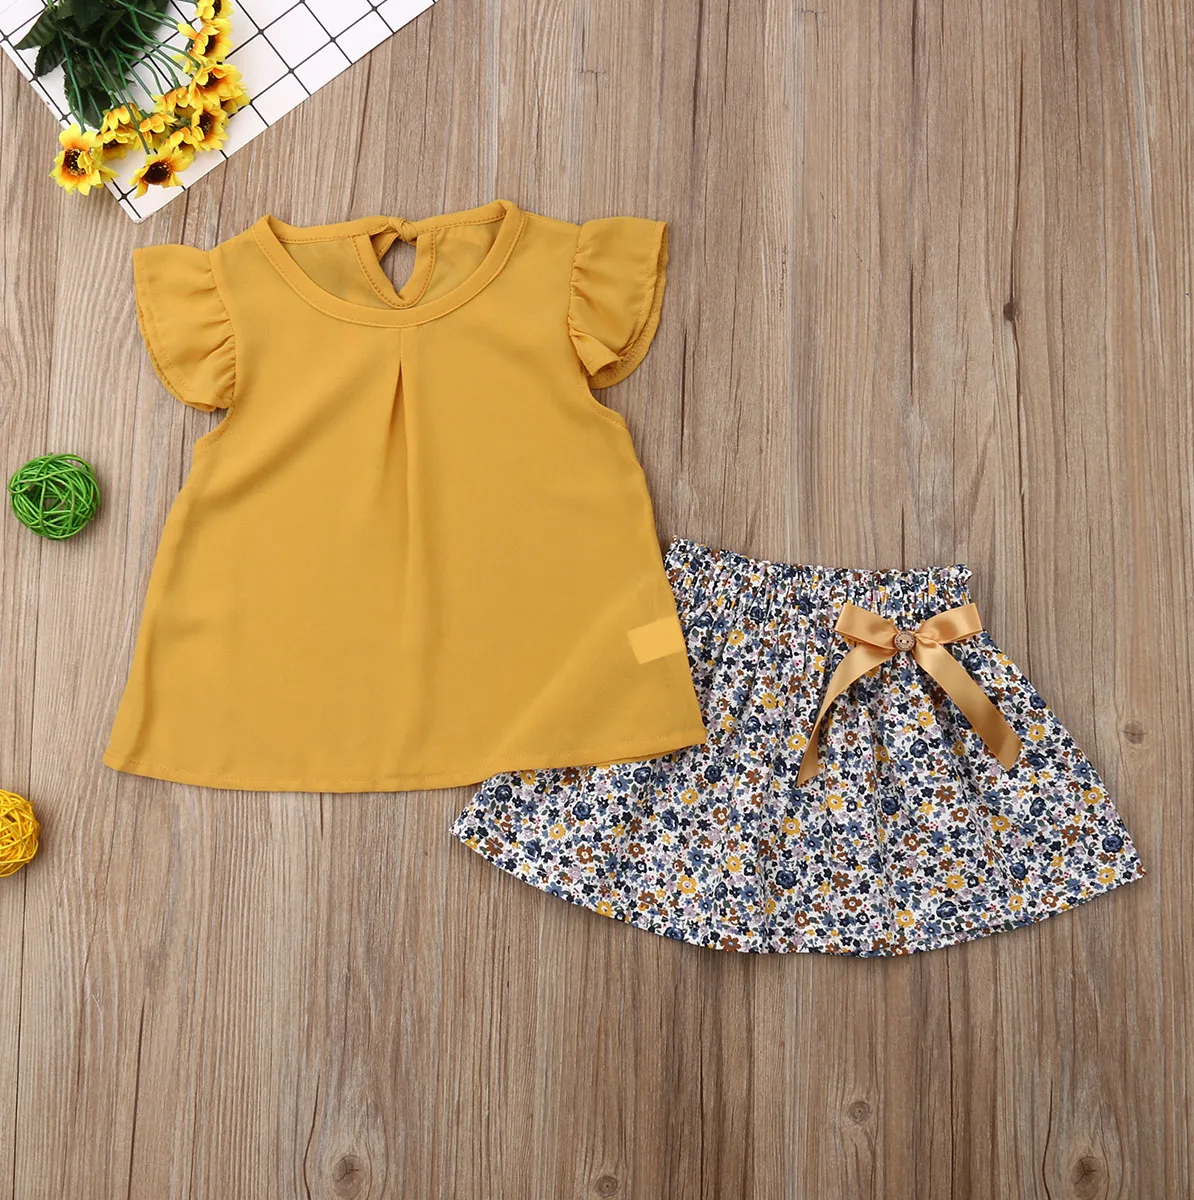 Toddler Girl Short Flying sleeve Shirt Top and Floral Skirt Clothes Set